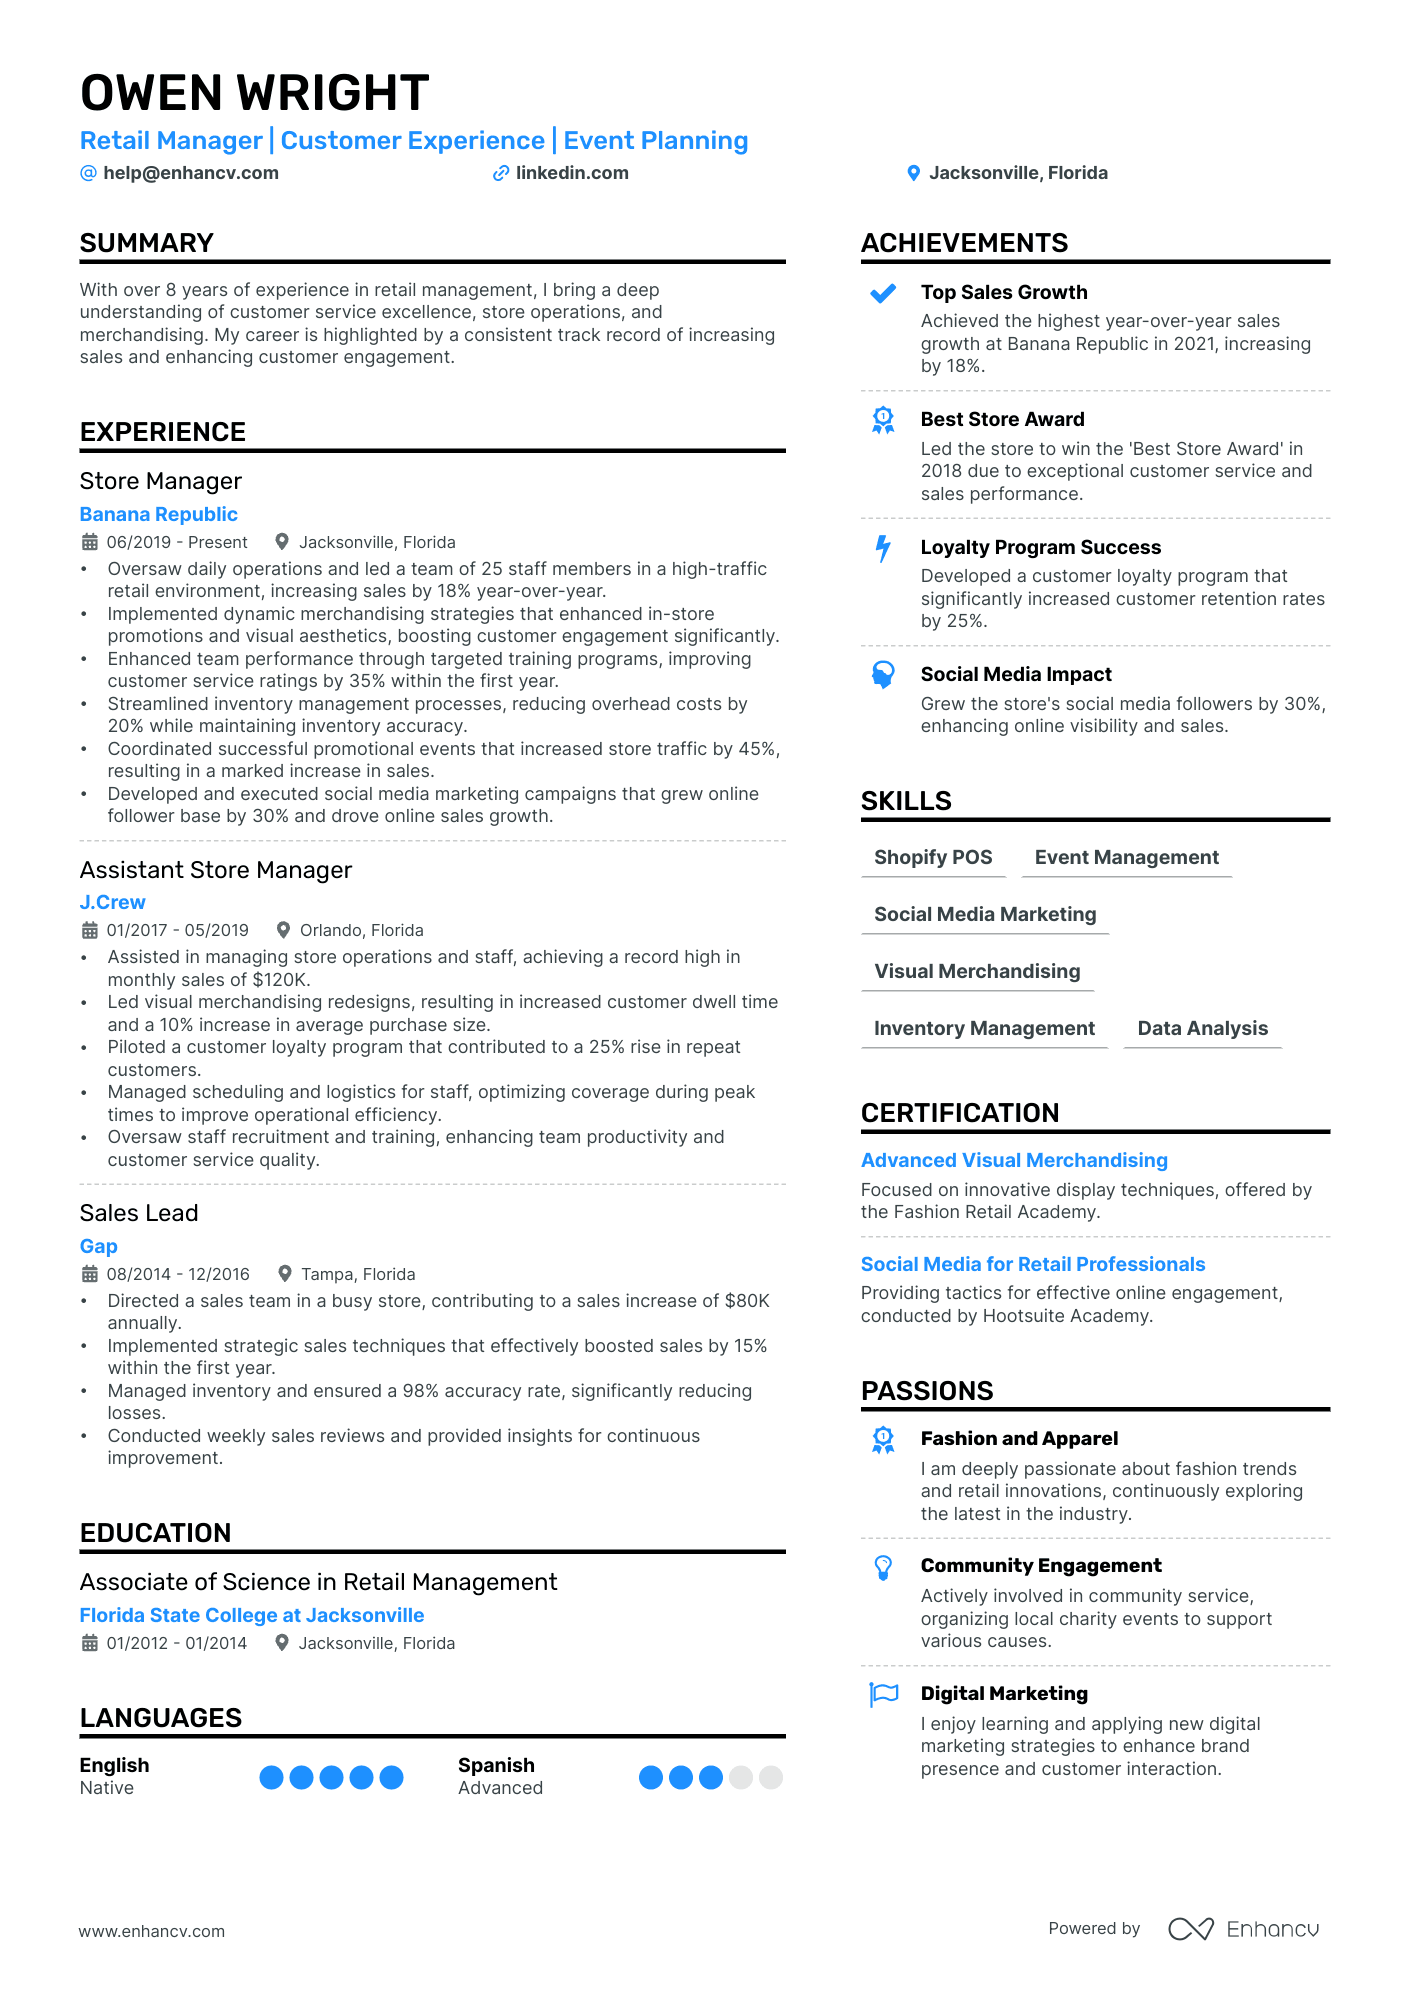 Retail Manager | Customer Experience | Event Planning resume example